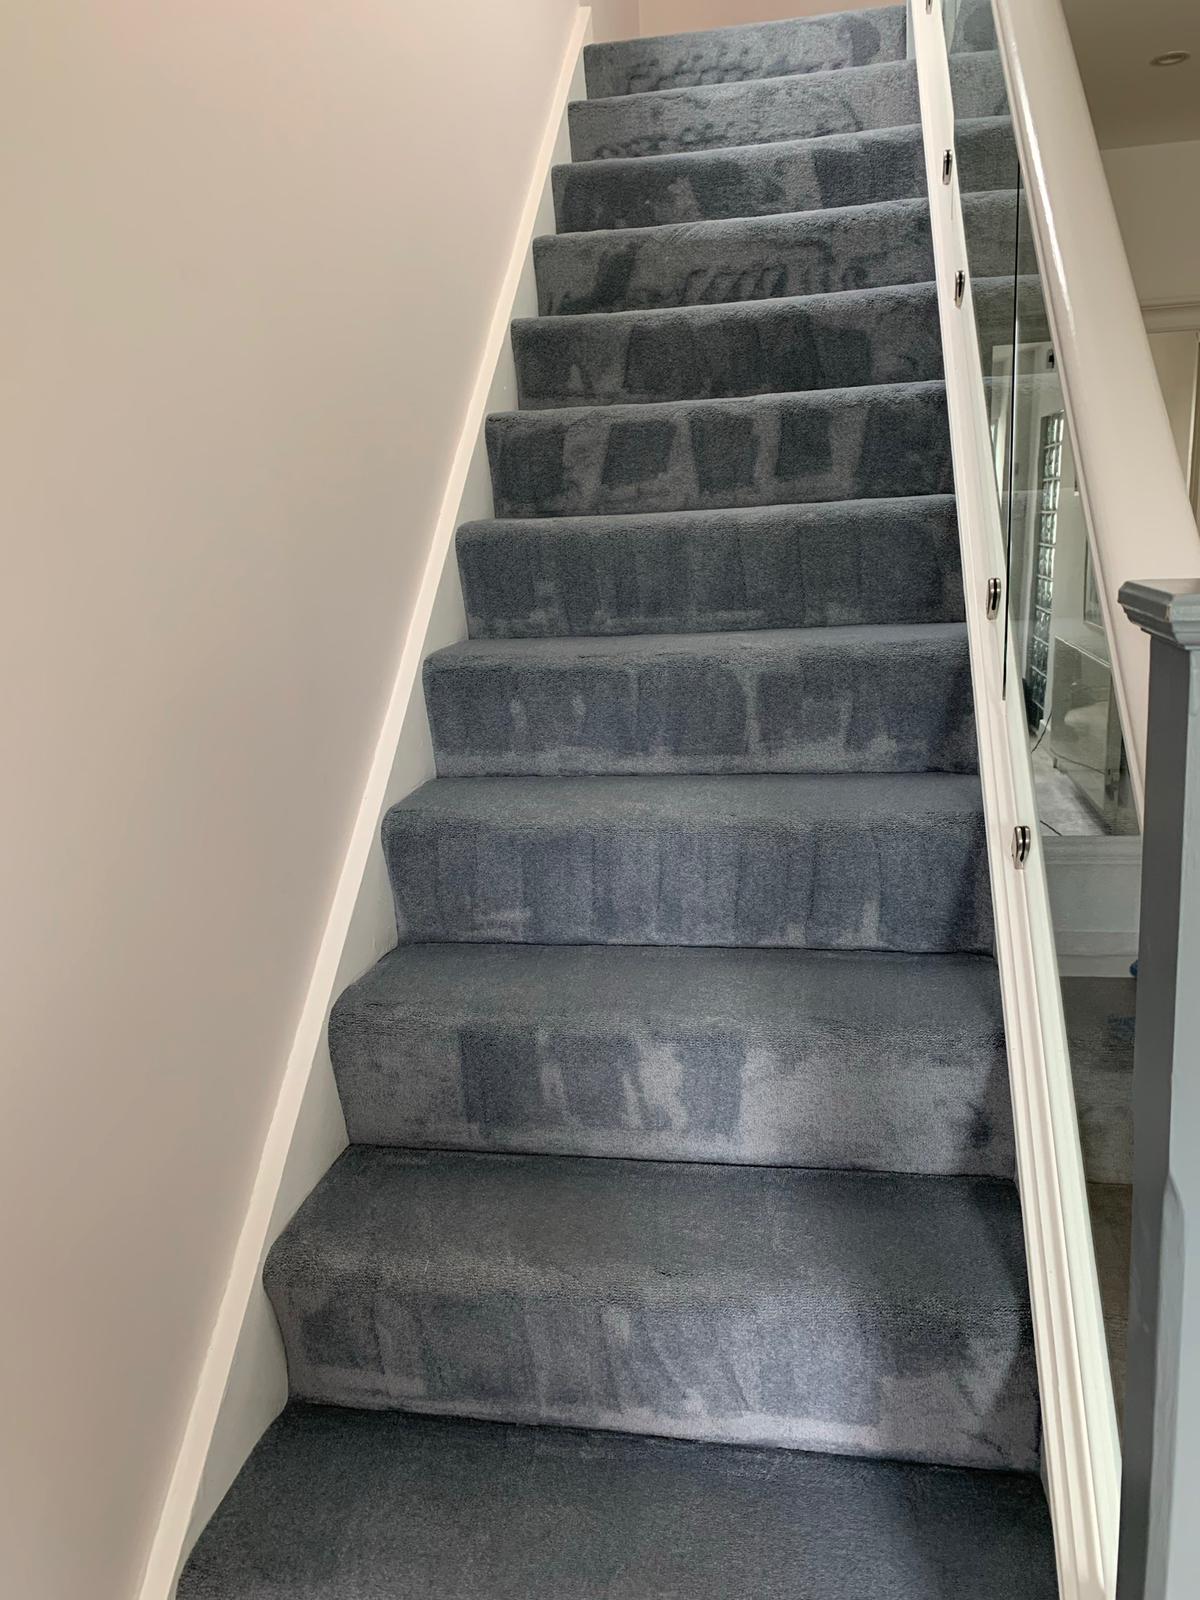 //blackwellcontracts.ie/wp-content/uploads/2020/03/house-cleaners-after.jpg